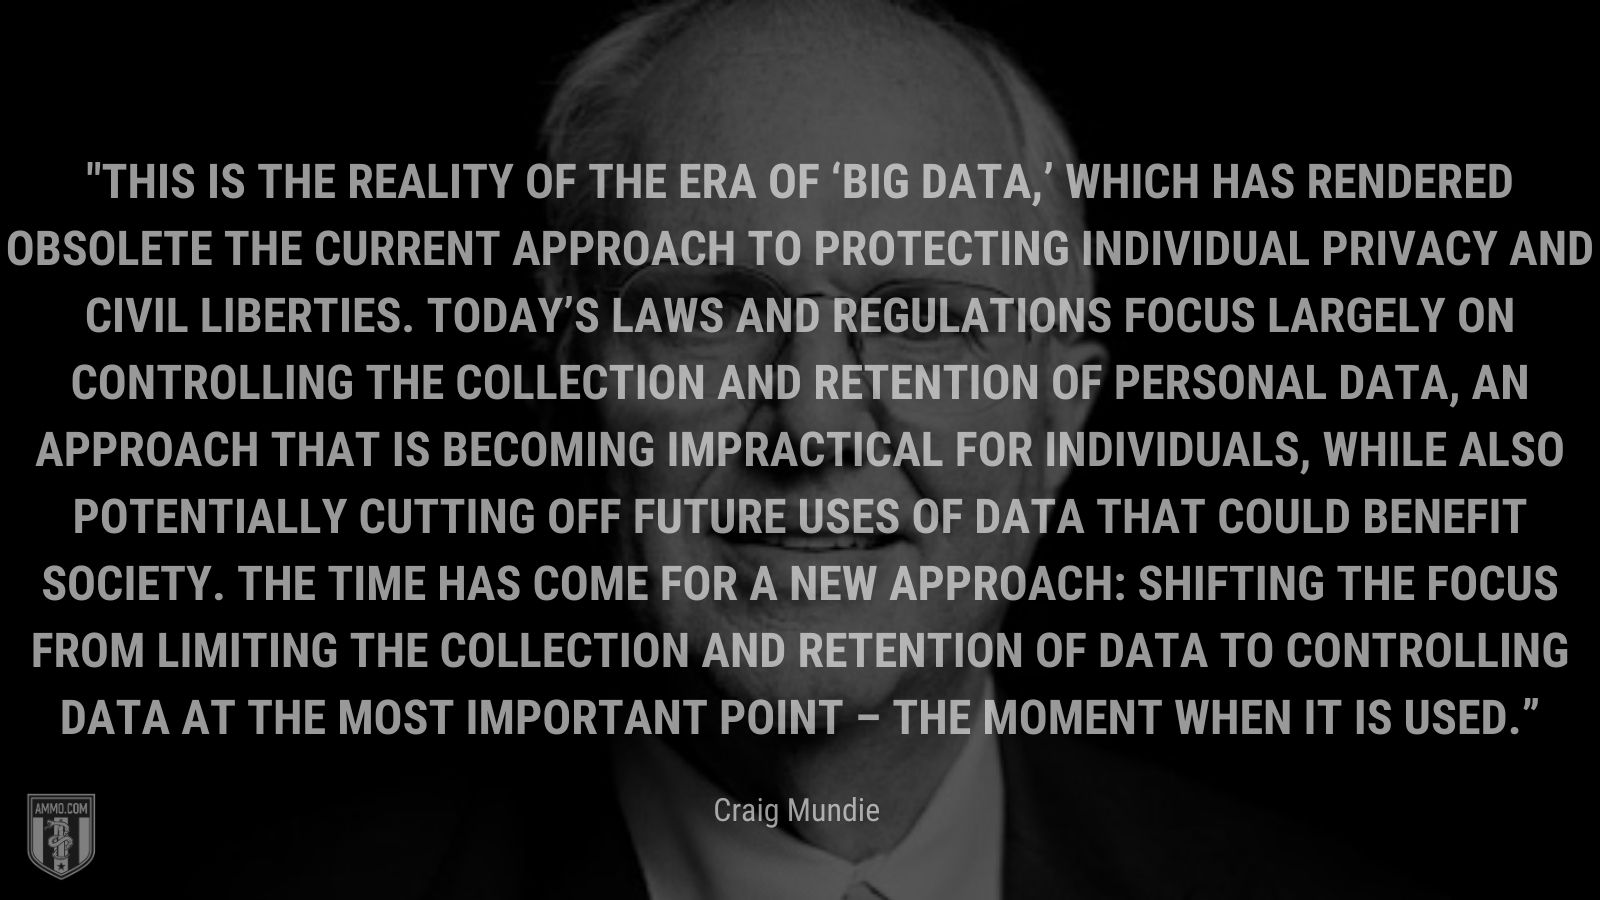 “This is the reality of the era of ‘big data,’ which has rendered obsolete the current approach to protecting individual privacy and civil liberties. Today’s laws and regulations focus largely on controlling the collection and retention of personal data, an approach that is becoming impractical for individuals, while also potentially cutting off future uses of data that could benefit society. The time has come for a new approach: shifting the focus from limiting the collection and retention of data to controlling data at the most important point – the moment when it is used.” - Craig Mundie